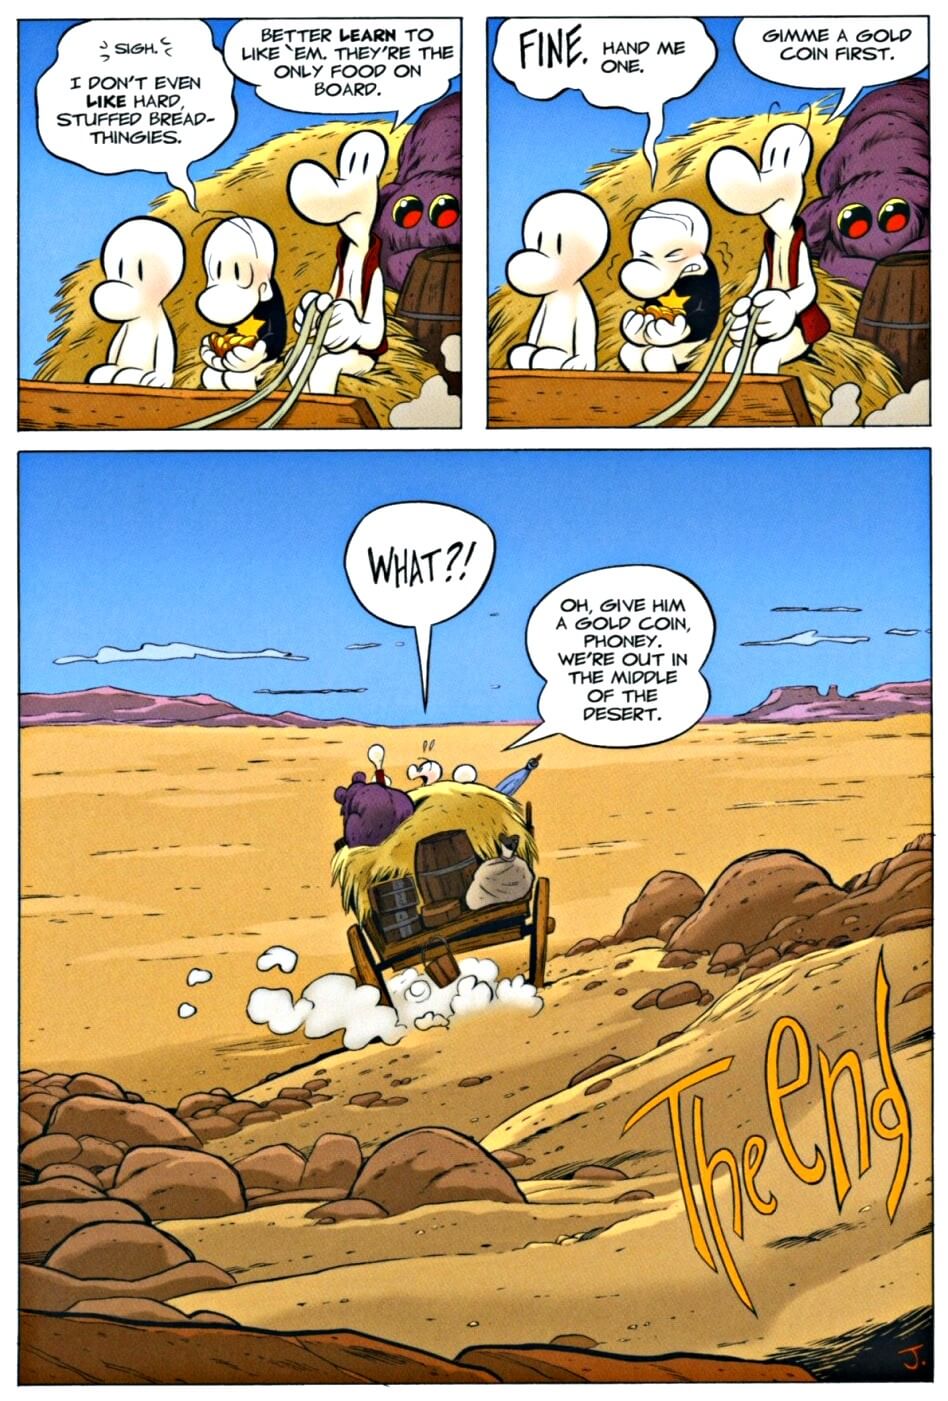 page 212 chapter 8 of bone 9 crown of horns graphic novel